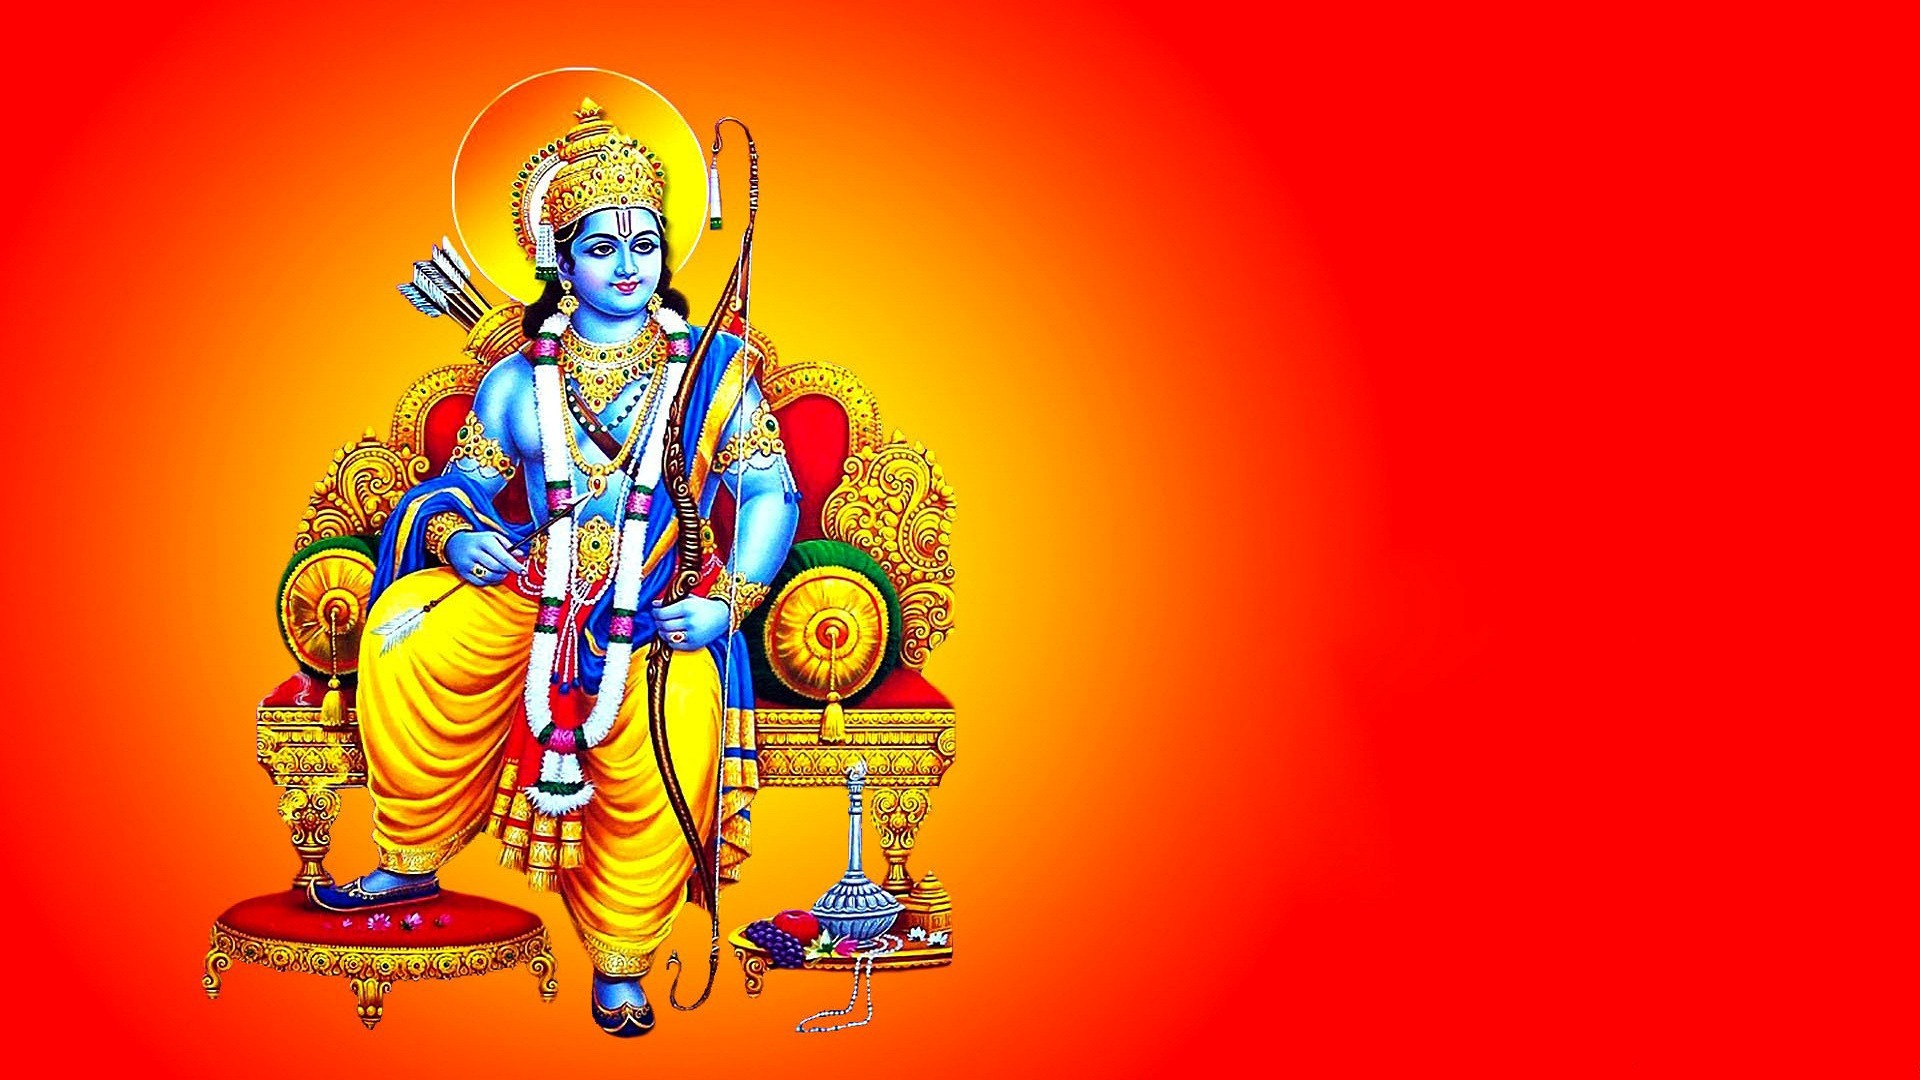 Lord Rama Wallpapers High Resolution